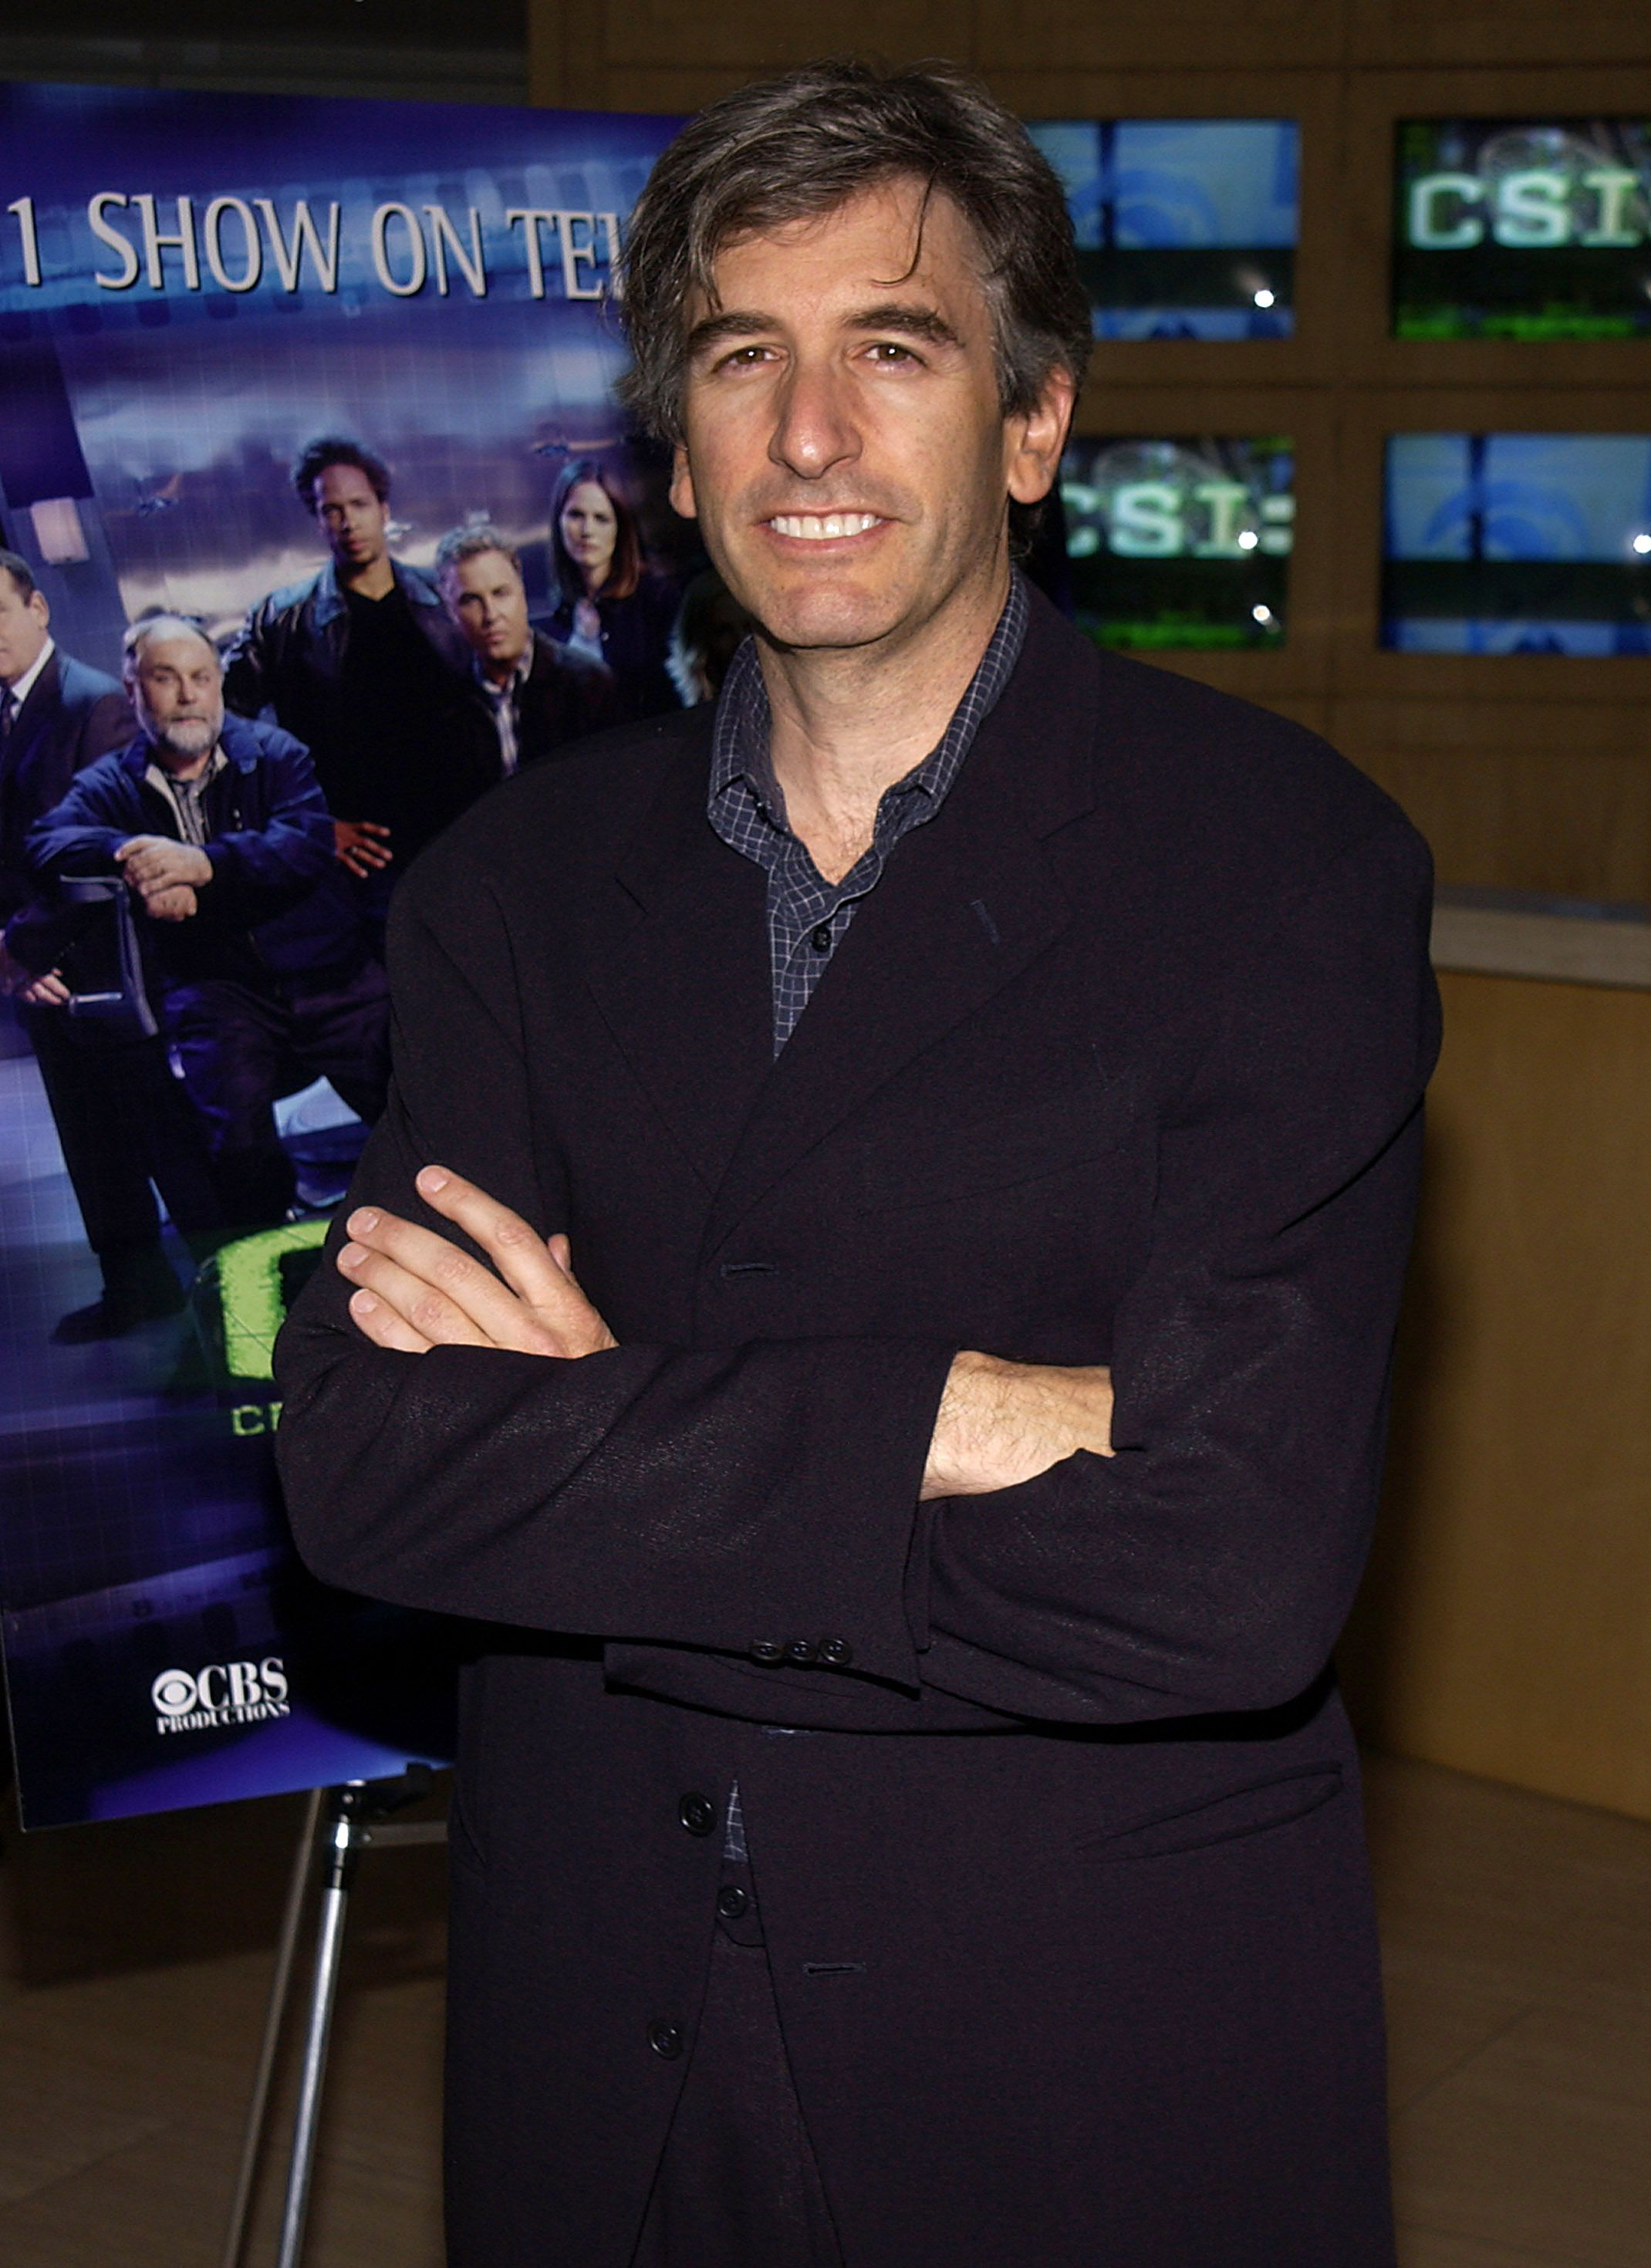 Peter Sussman at the fourth season premiere screening of "CSI: Crime Scene Investigation" on September 15, 2003 | Source: Getty Images